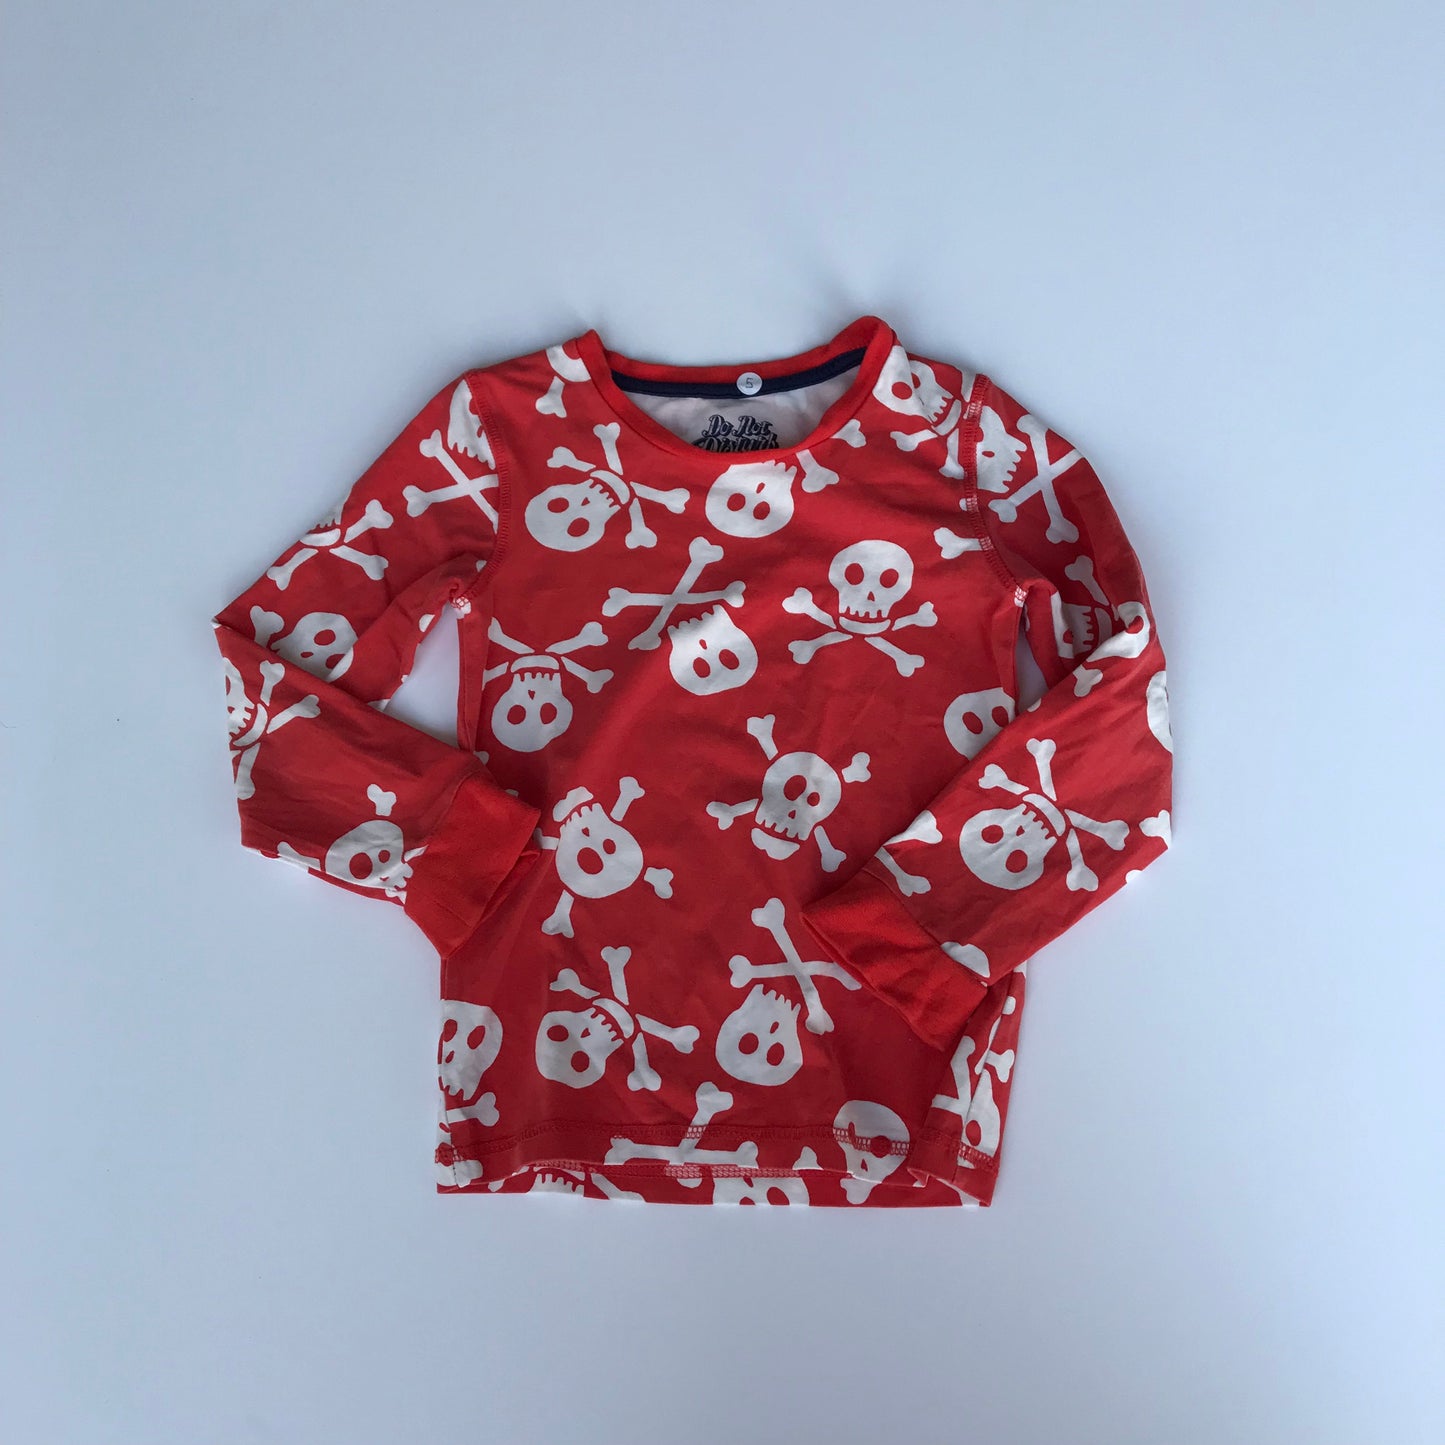 Red Skull Long Sleeve T-Shirt Age 5